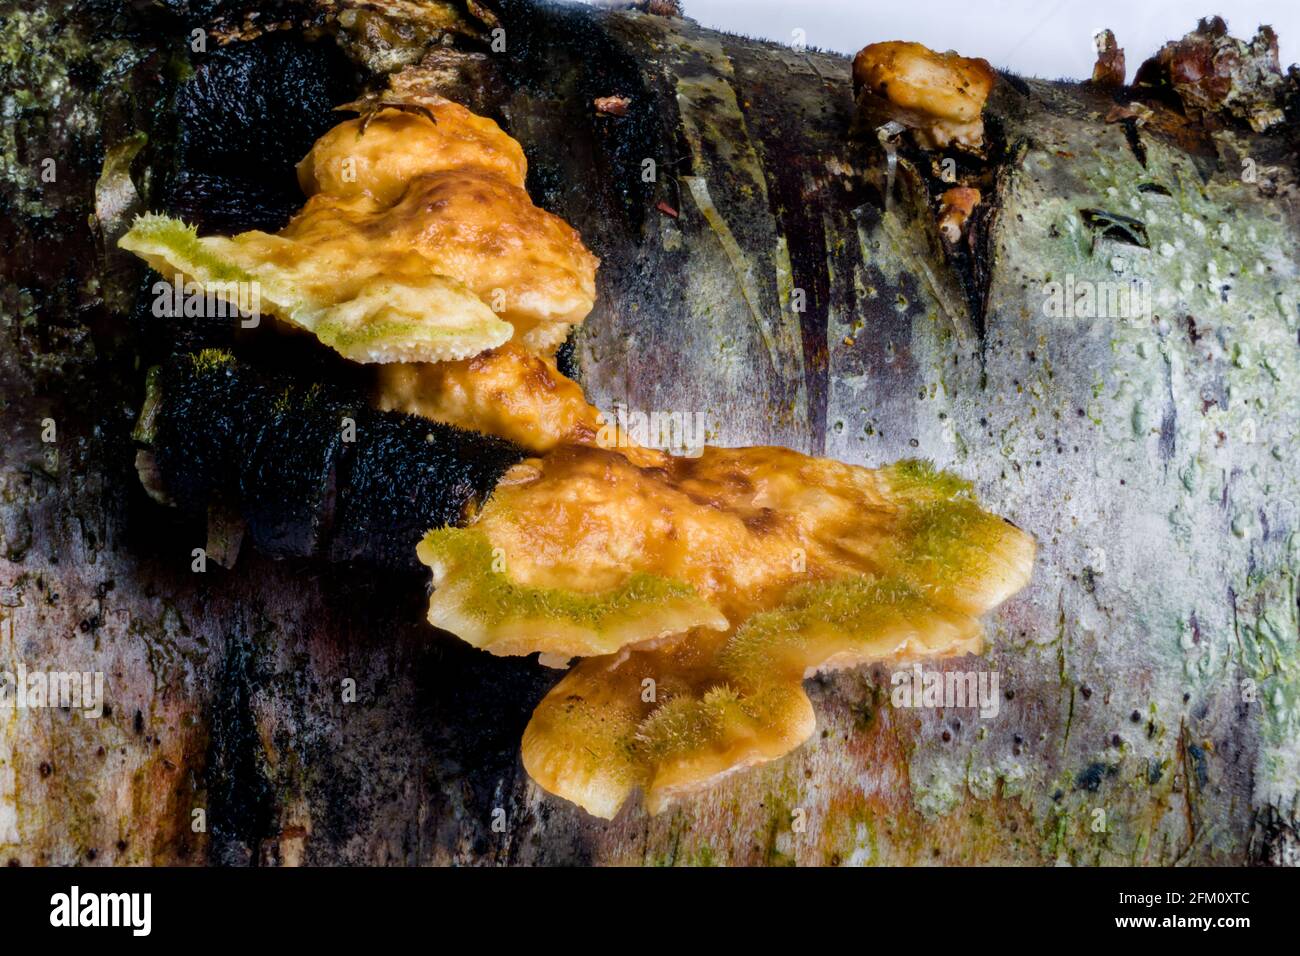 Hairy Curtain Crust Stereum hirsutum bracket fungi growing on dead wood in the Highlands of Scotland Stock Photo